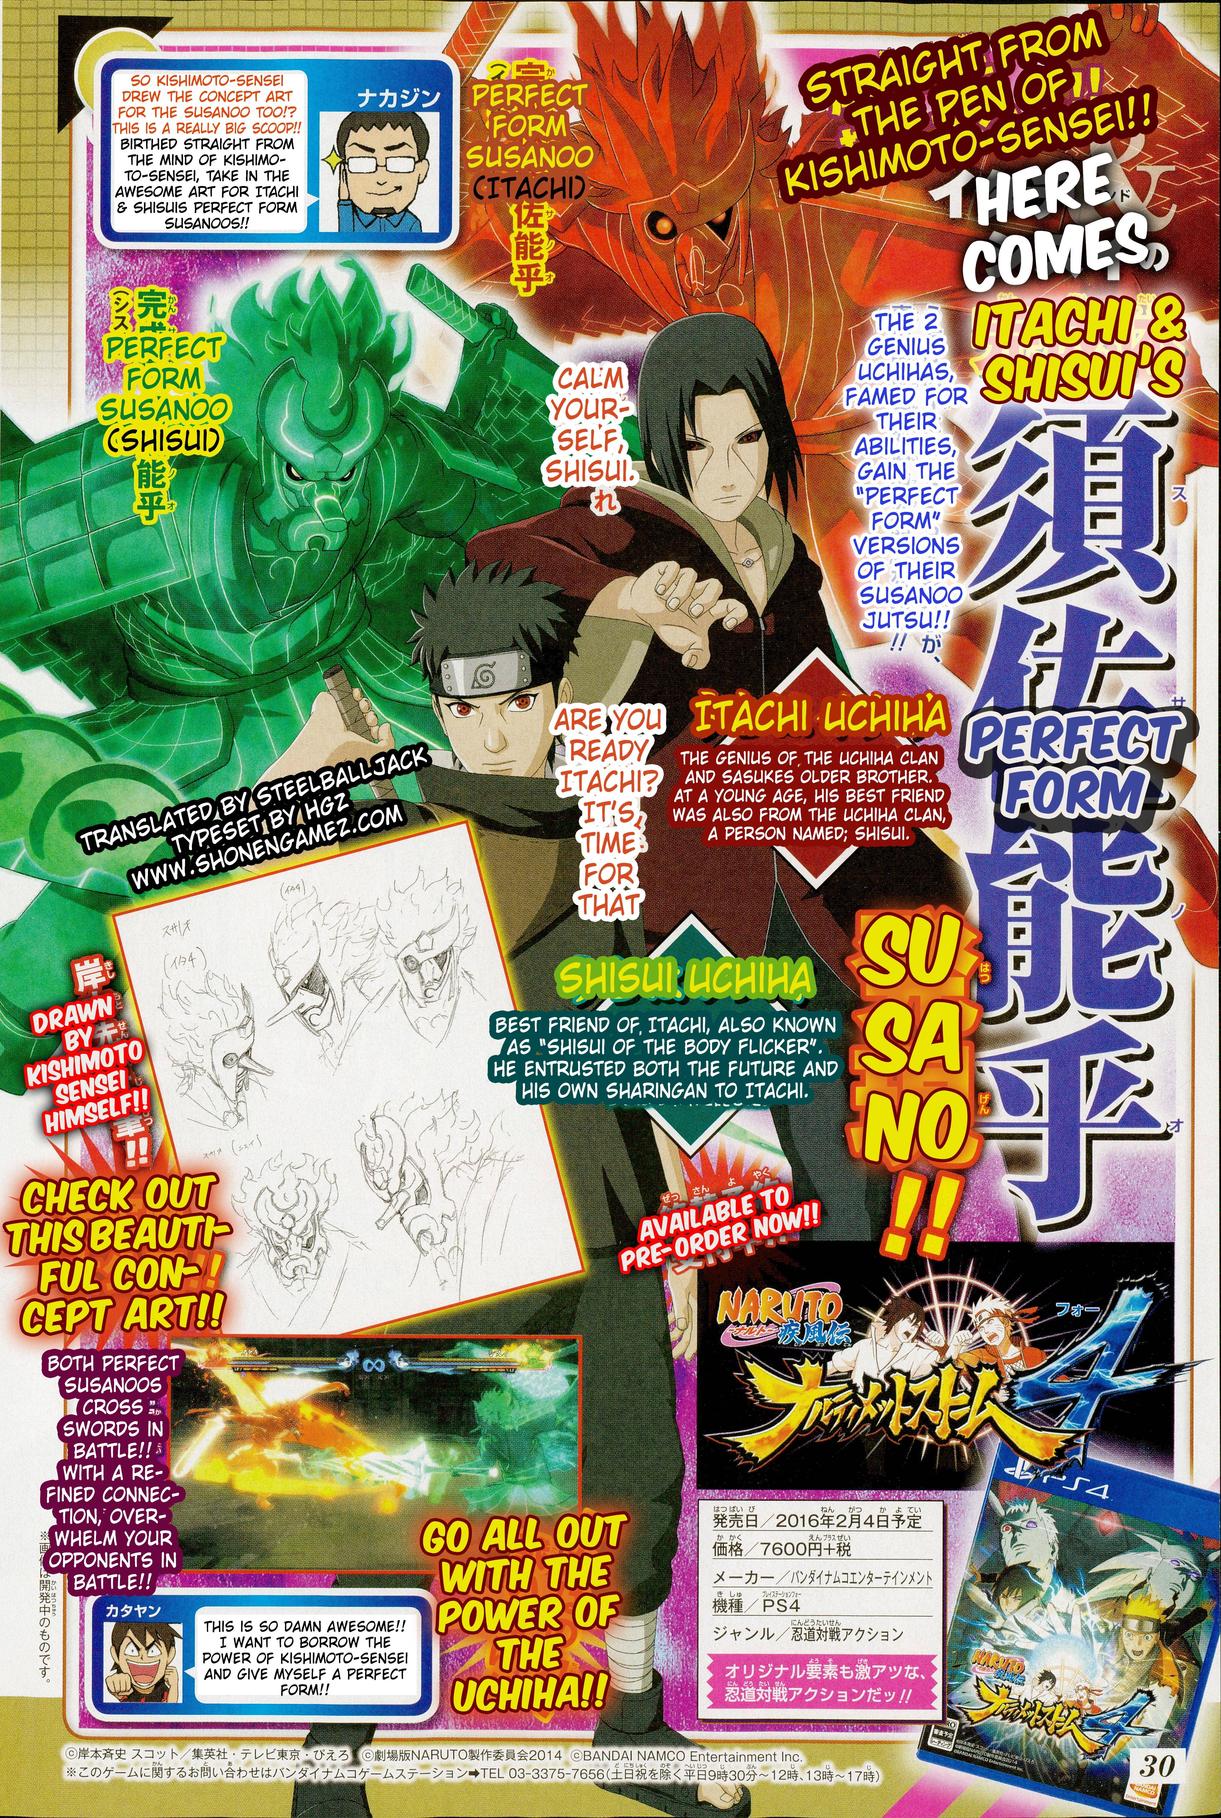 Kishimoto Gives Itachi Shisui Their Own Perfect Susano O In This Week S Storm 4 Scan All susanoo ultimate jutsus/new team ultimate jutsus | naruto shippuden: www shonengamez com